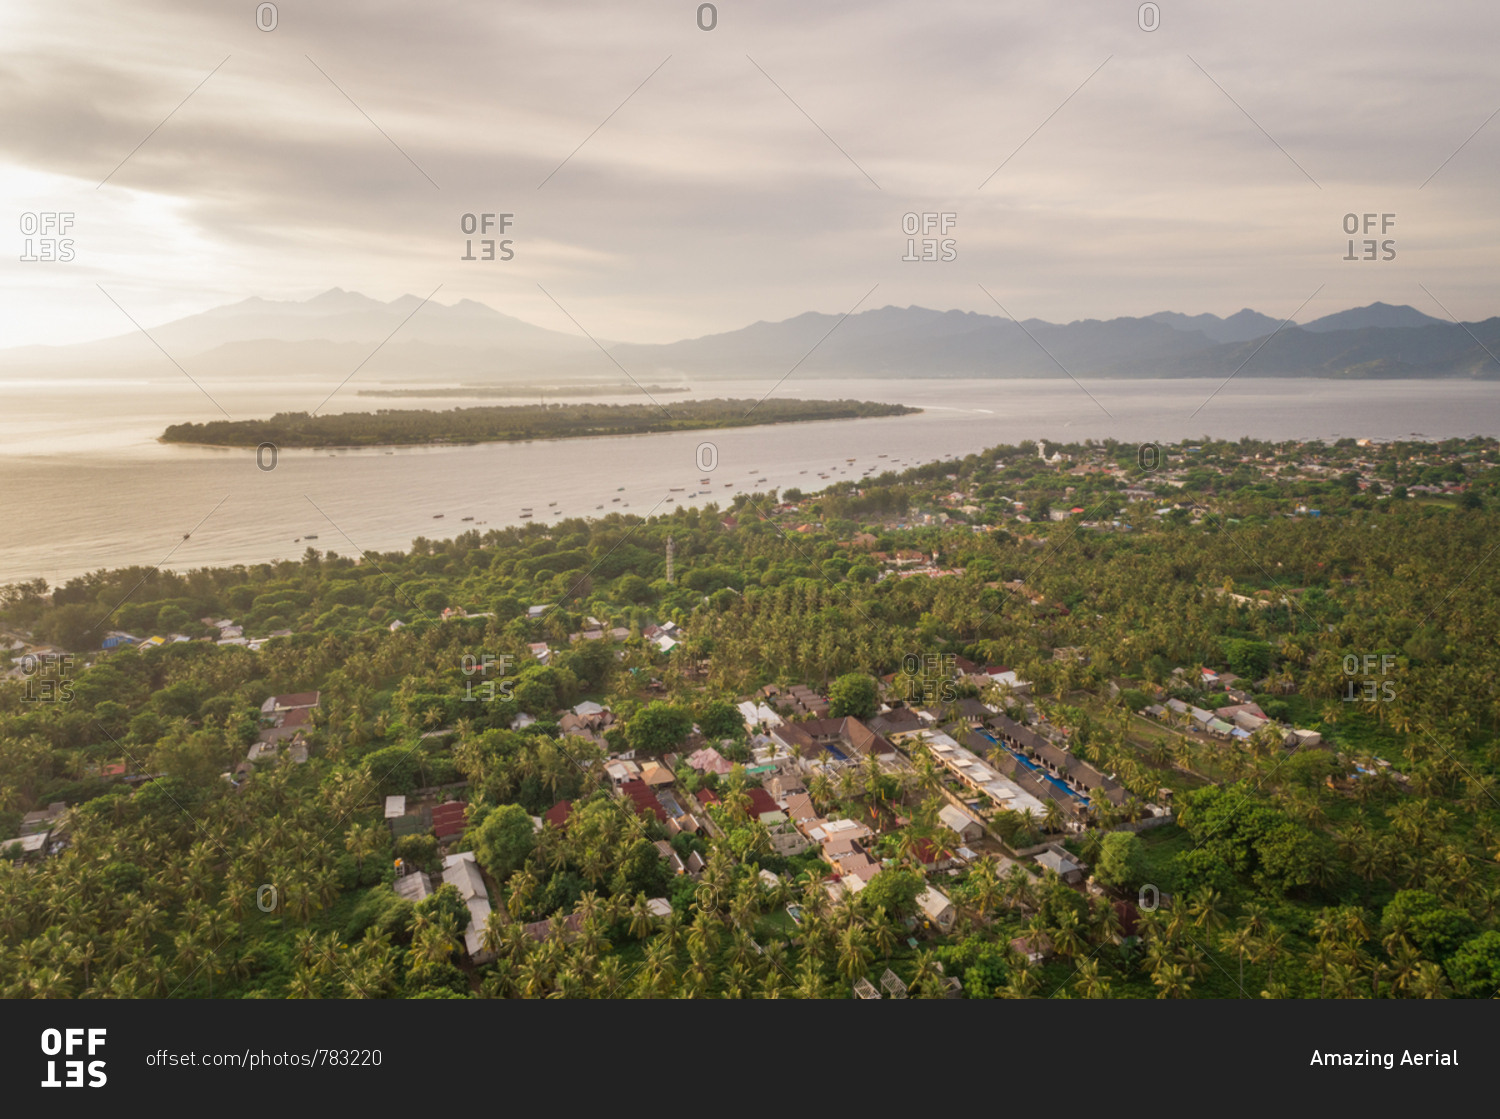 Aerial view of Pemenang city surrounding by tropical forest, Lombok island, Indonesia.